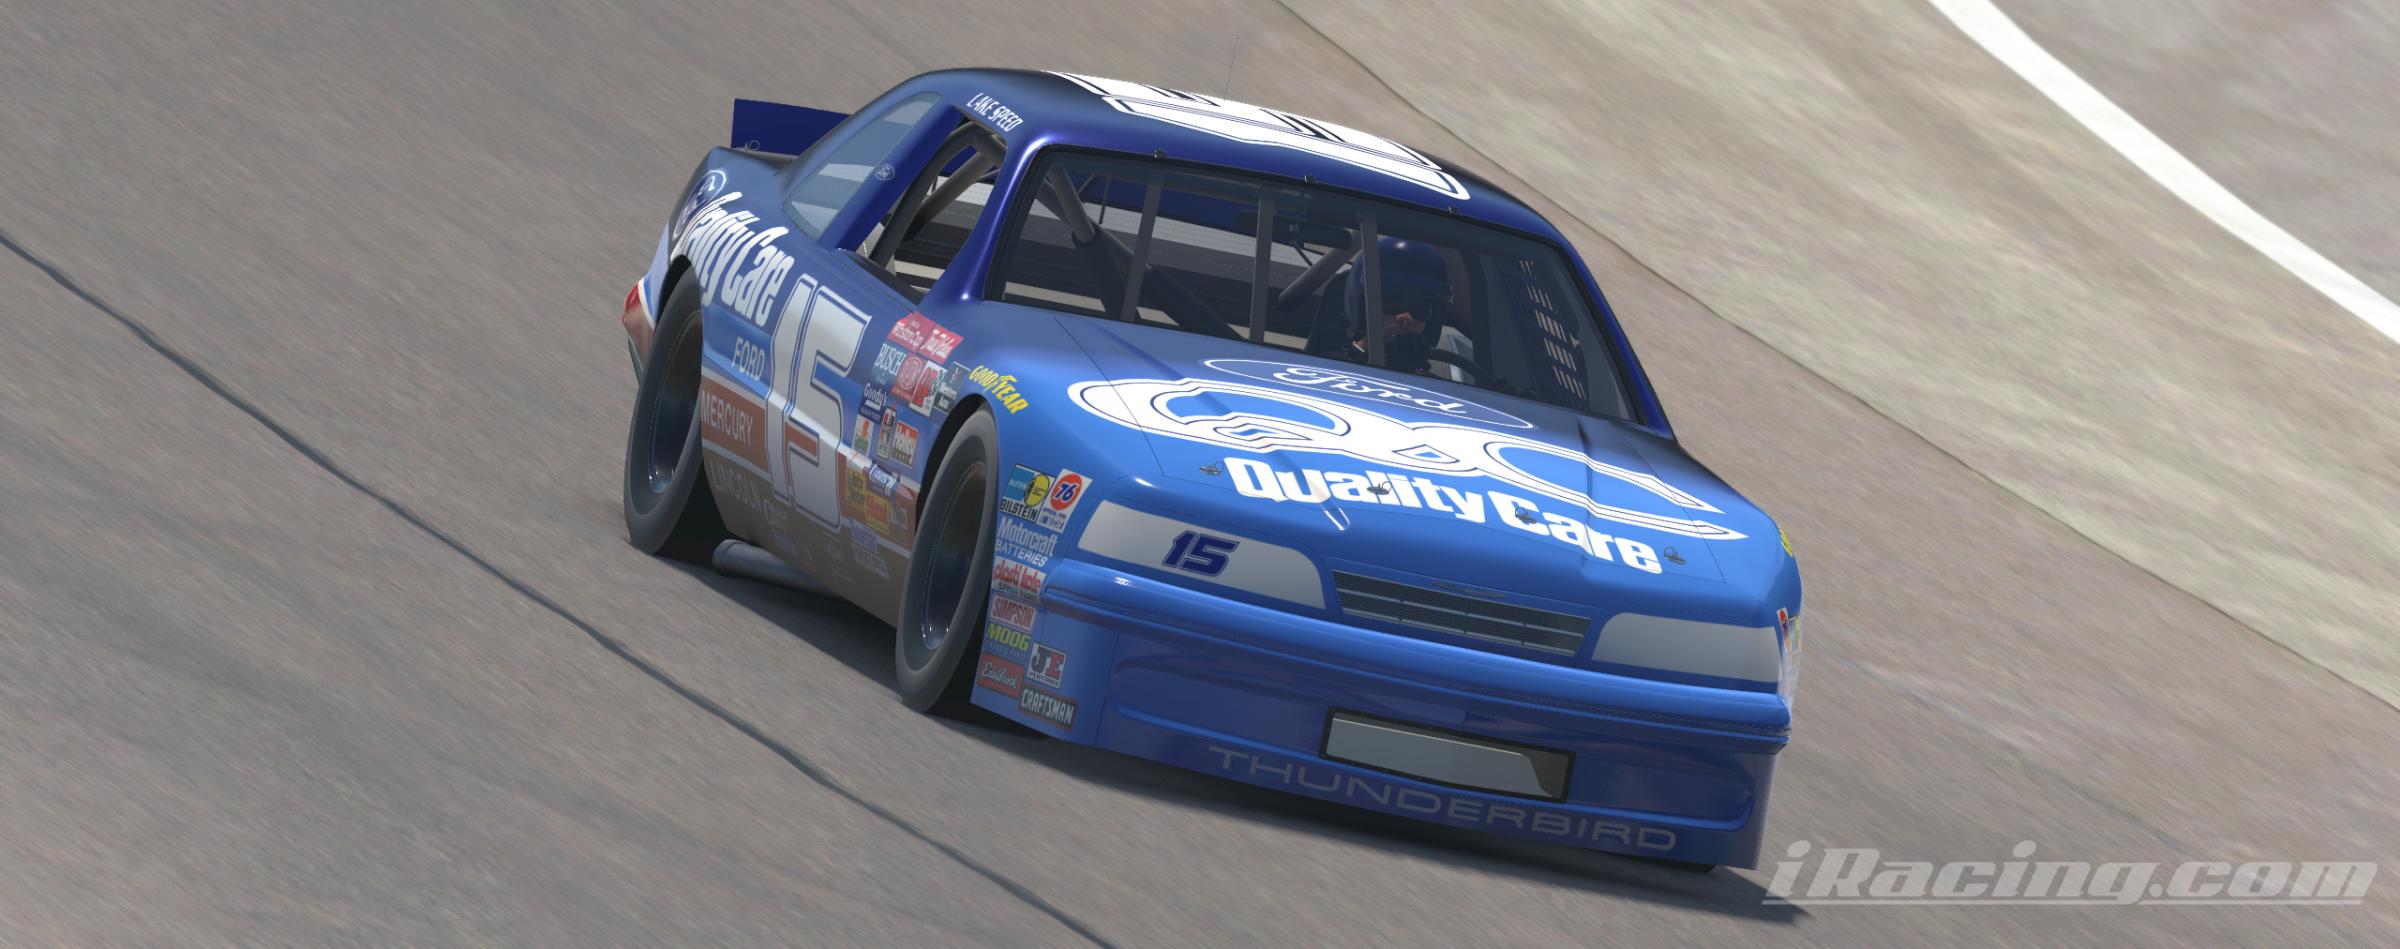 Preview of 1994 #15 Lake Speed - Winston Cup by William Goshen